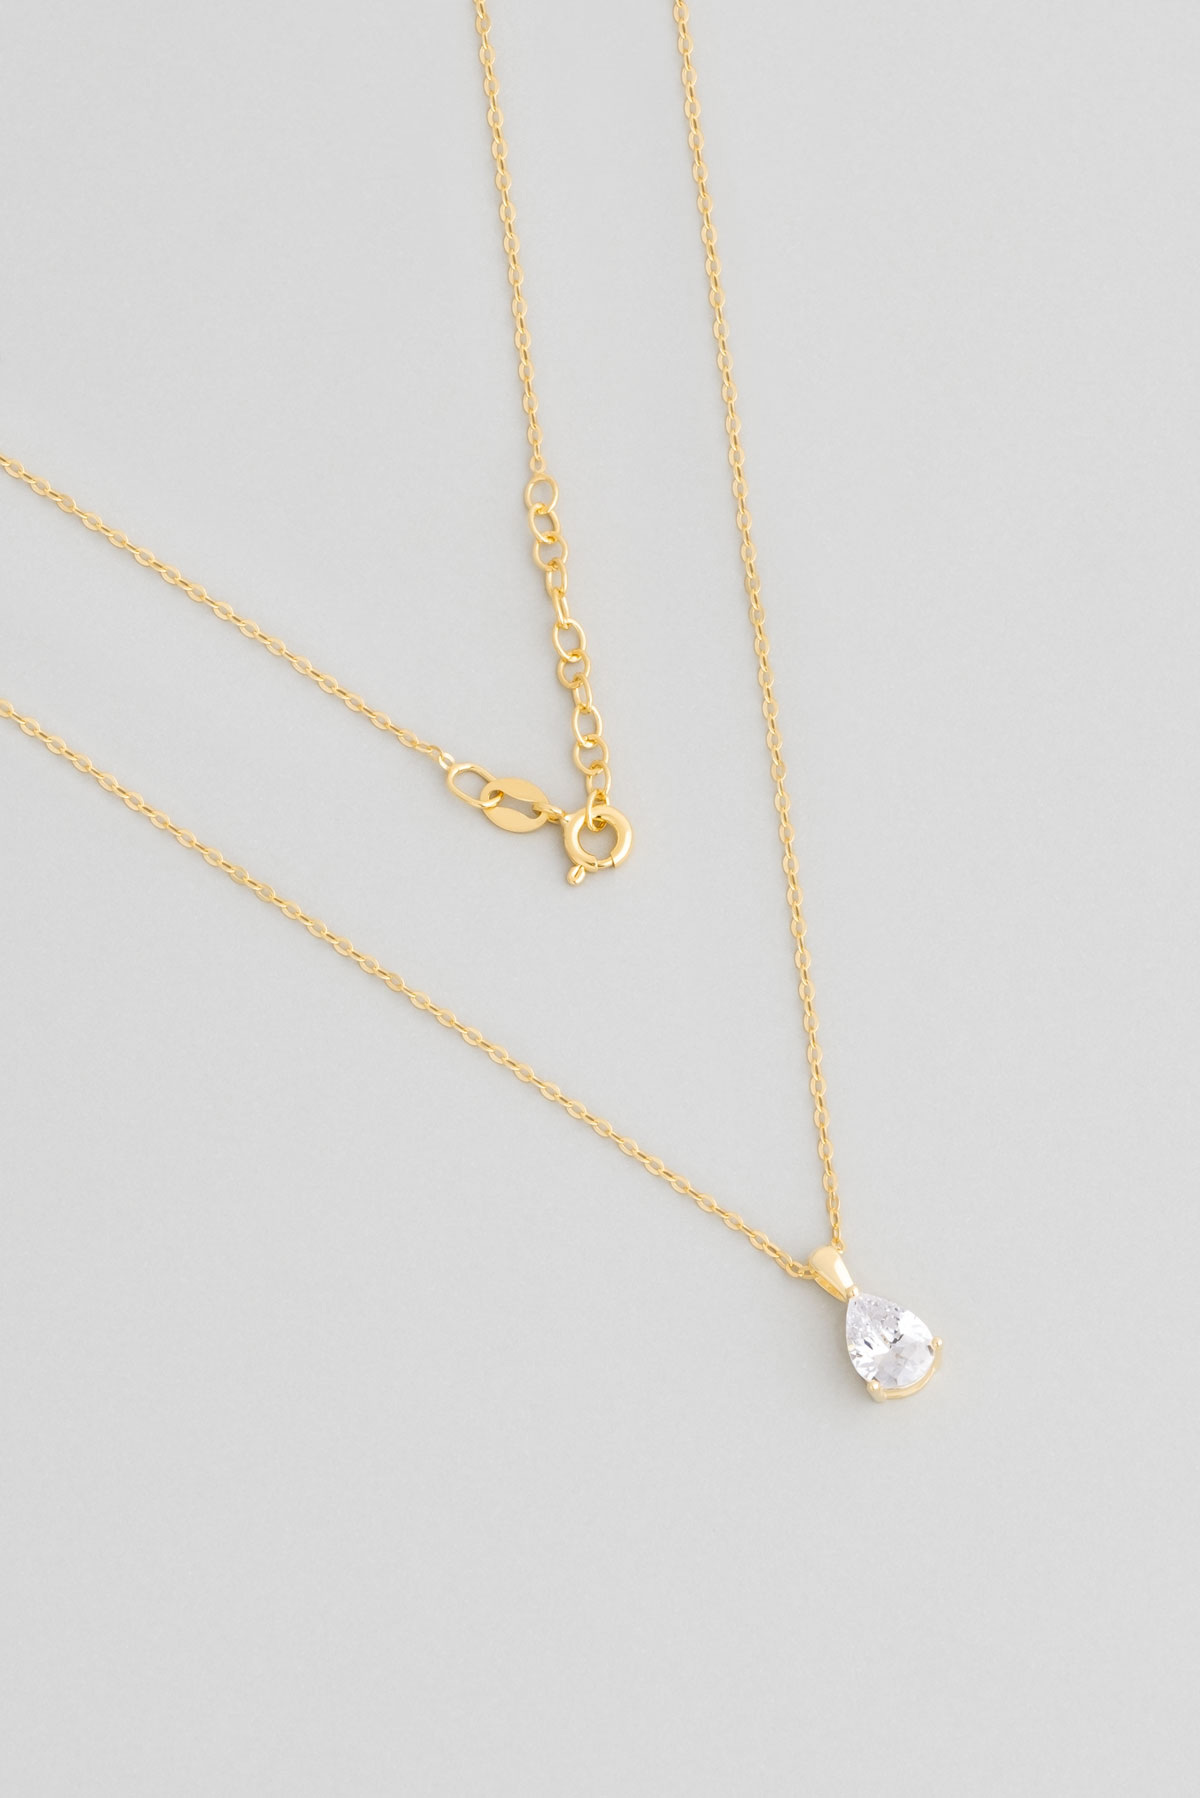 Droplet Cut Stone 18 Karat Yellow Gold Plated 42 cm Silver Necklace